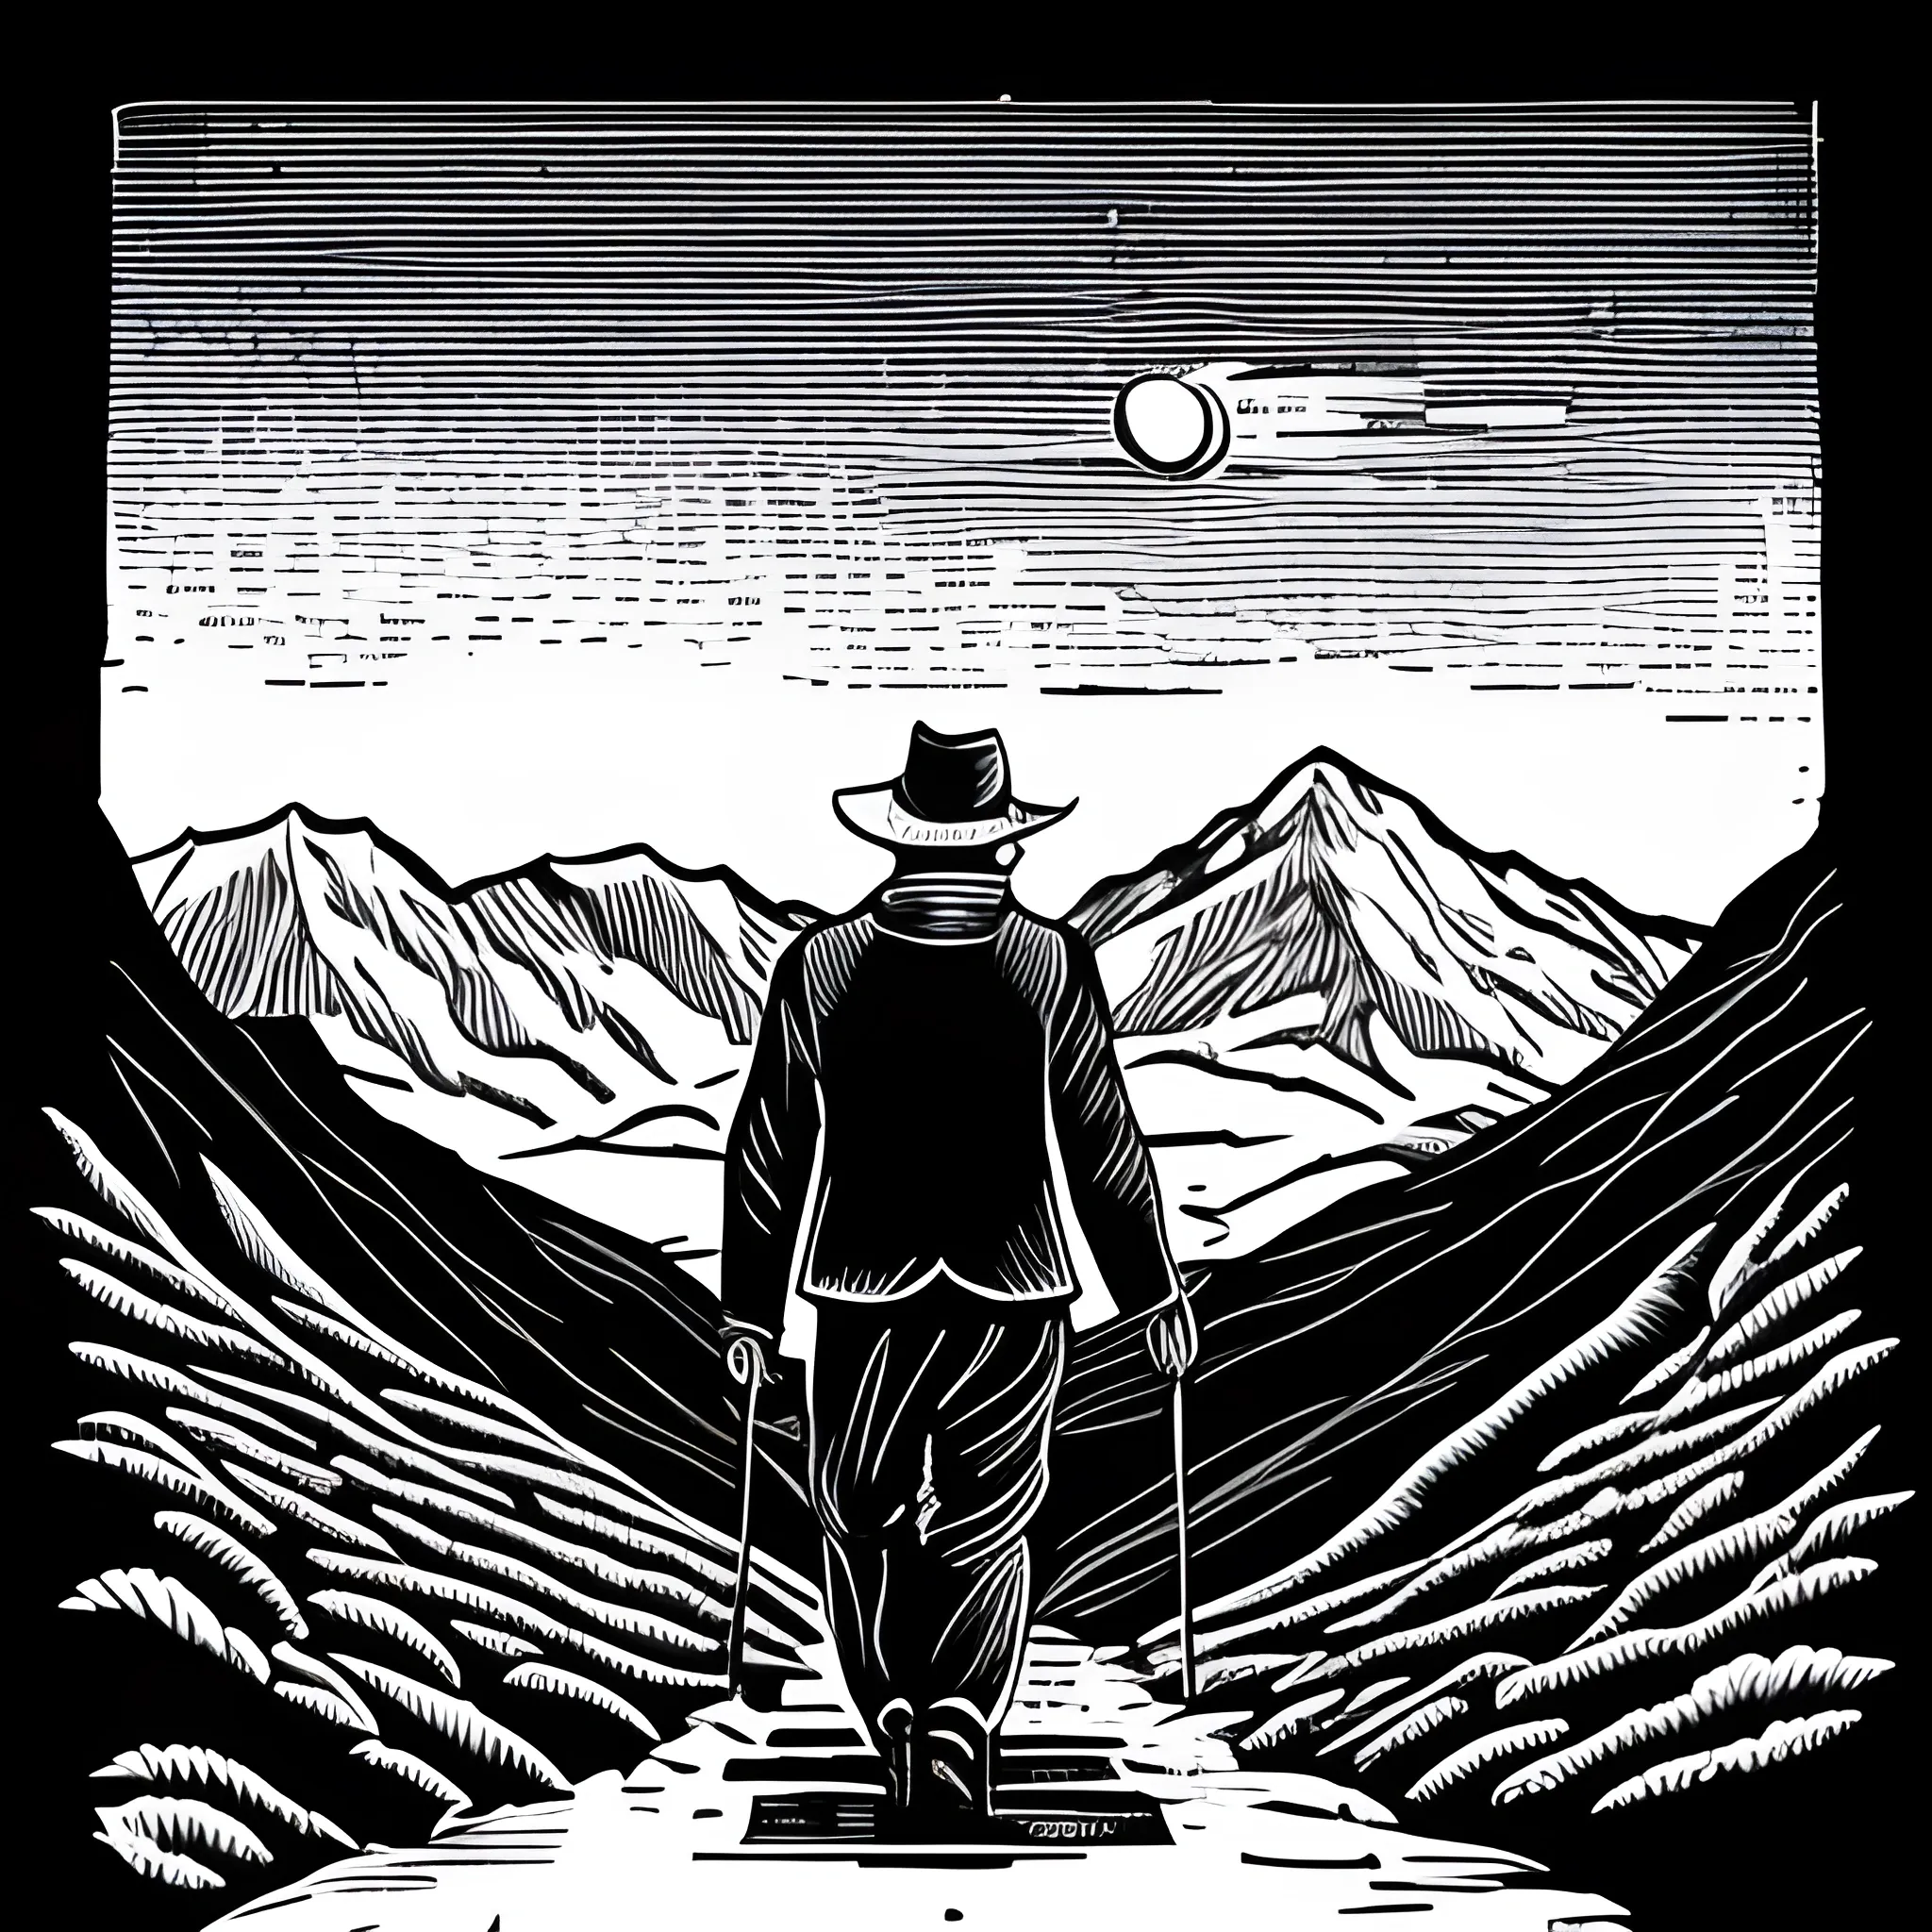 The old man in the mountains walks alone on the mountain trails. Classical black and white woodcut style; 